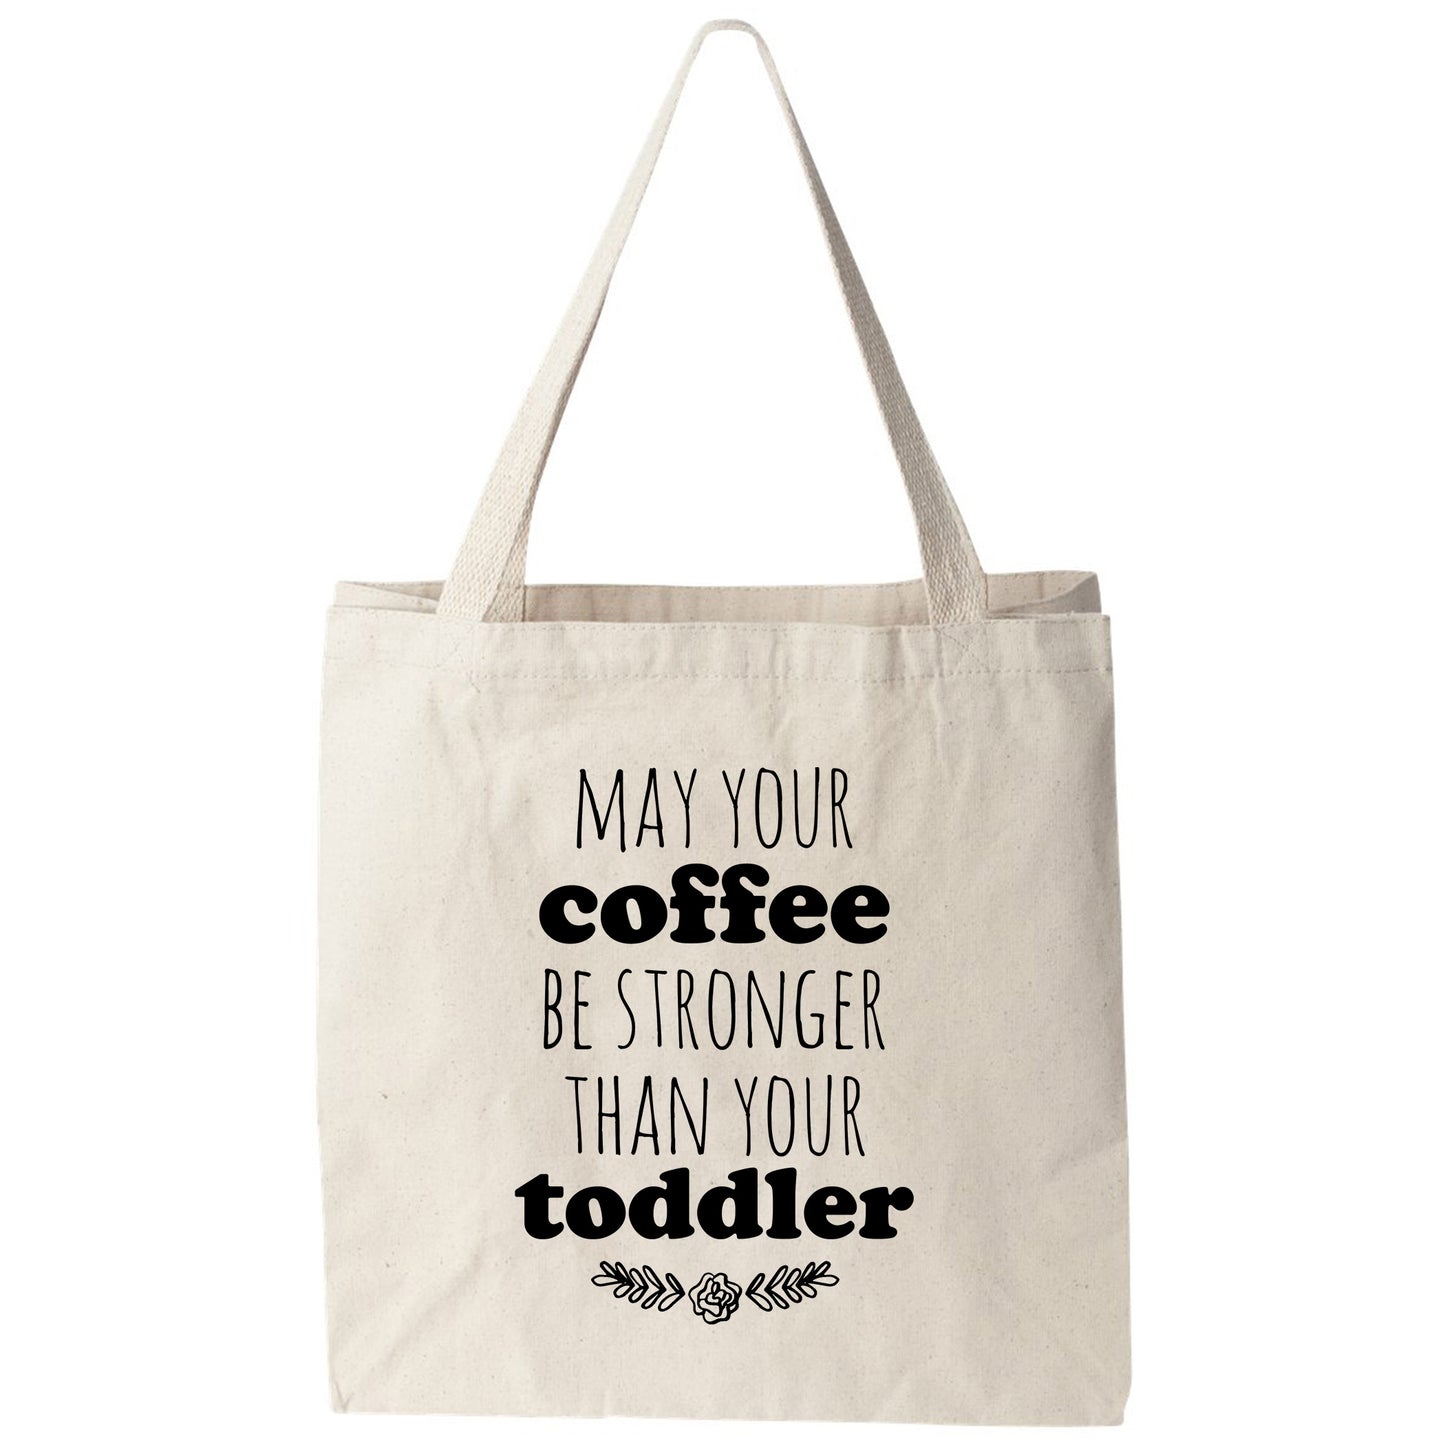 a tote bag that says may your coffee be stronger than your todder